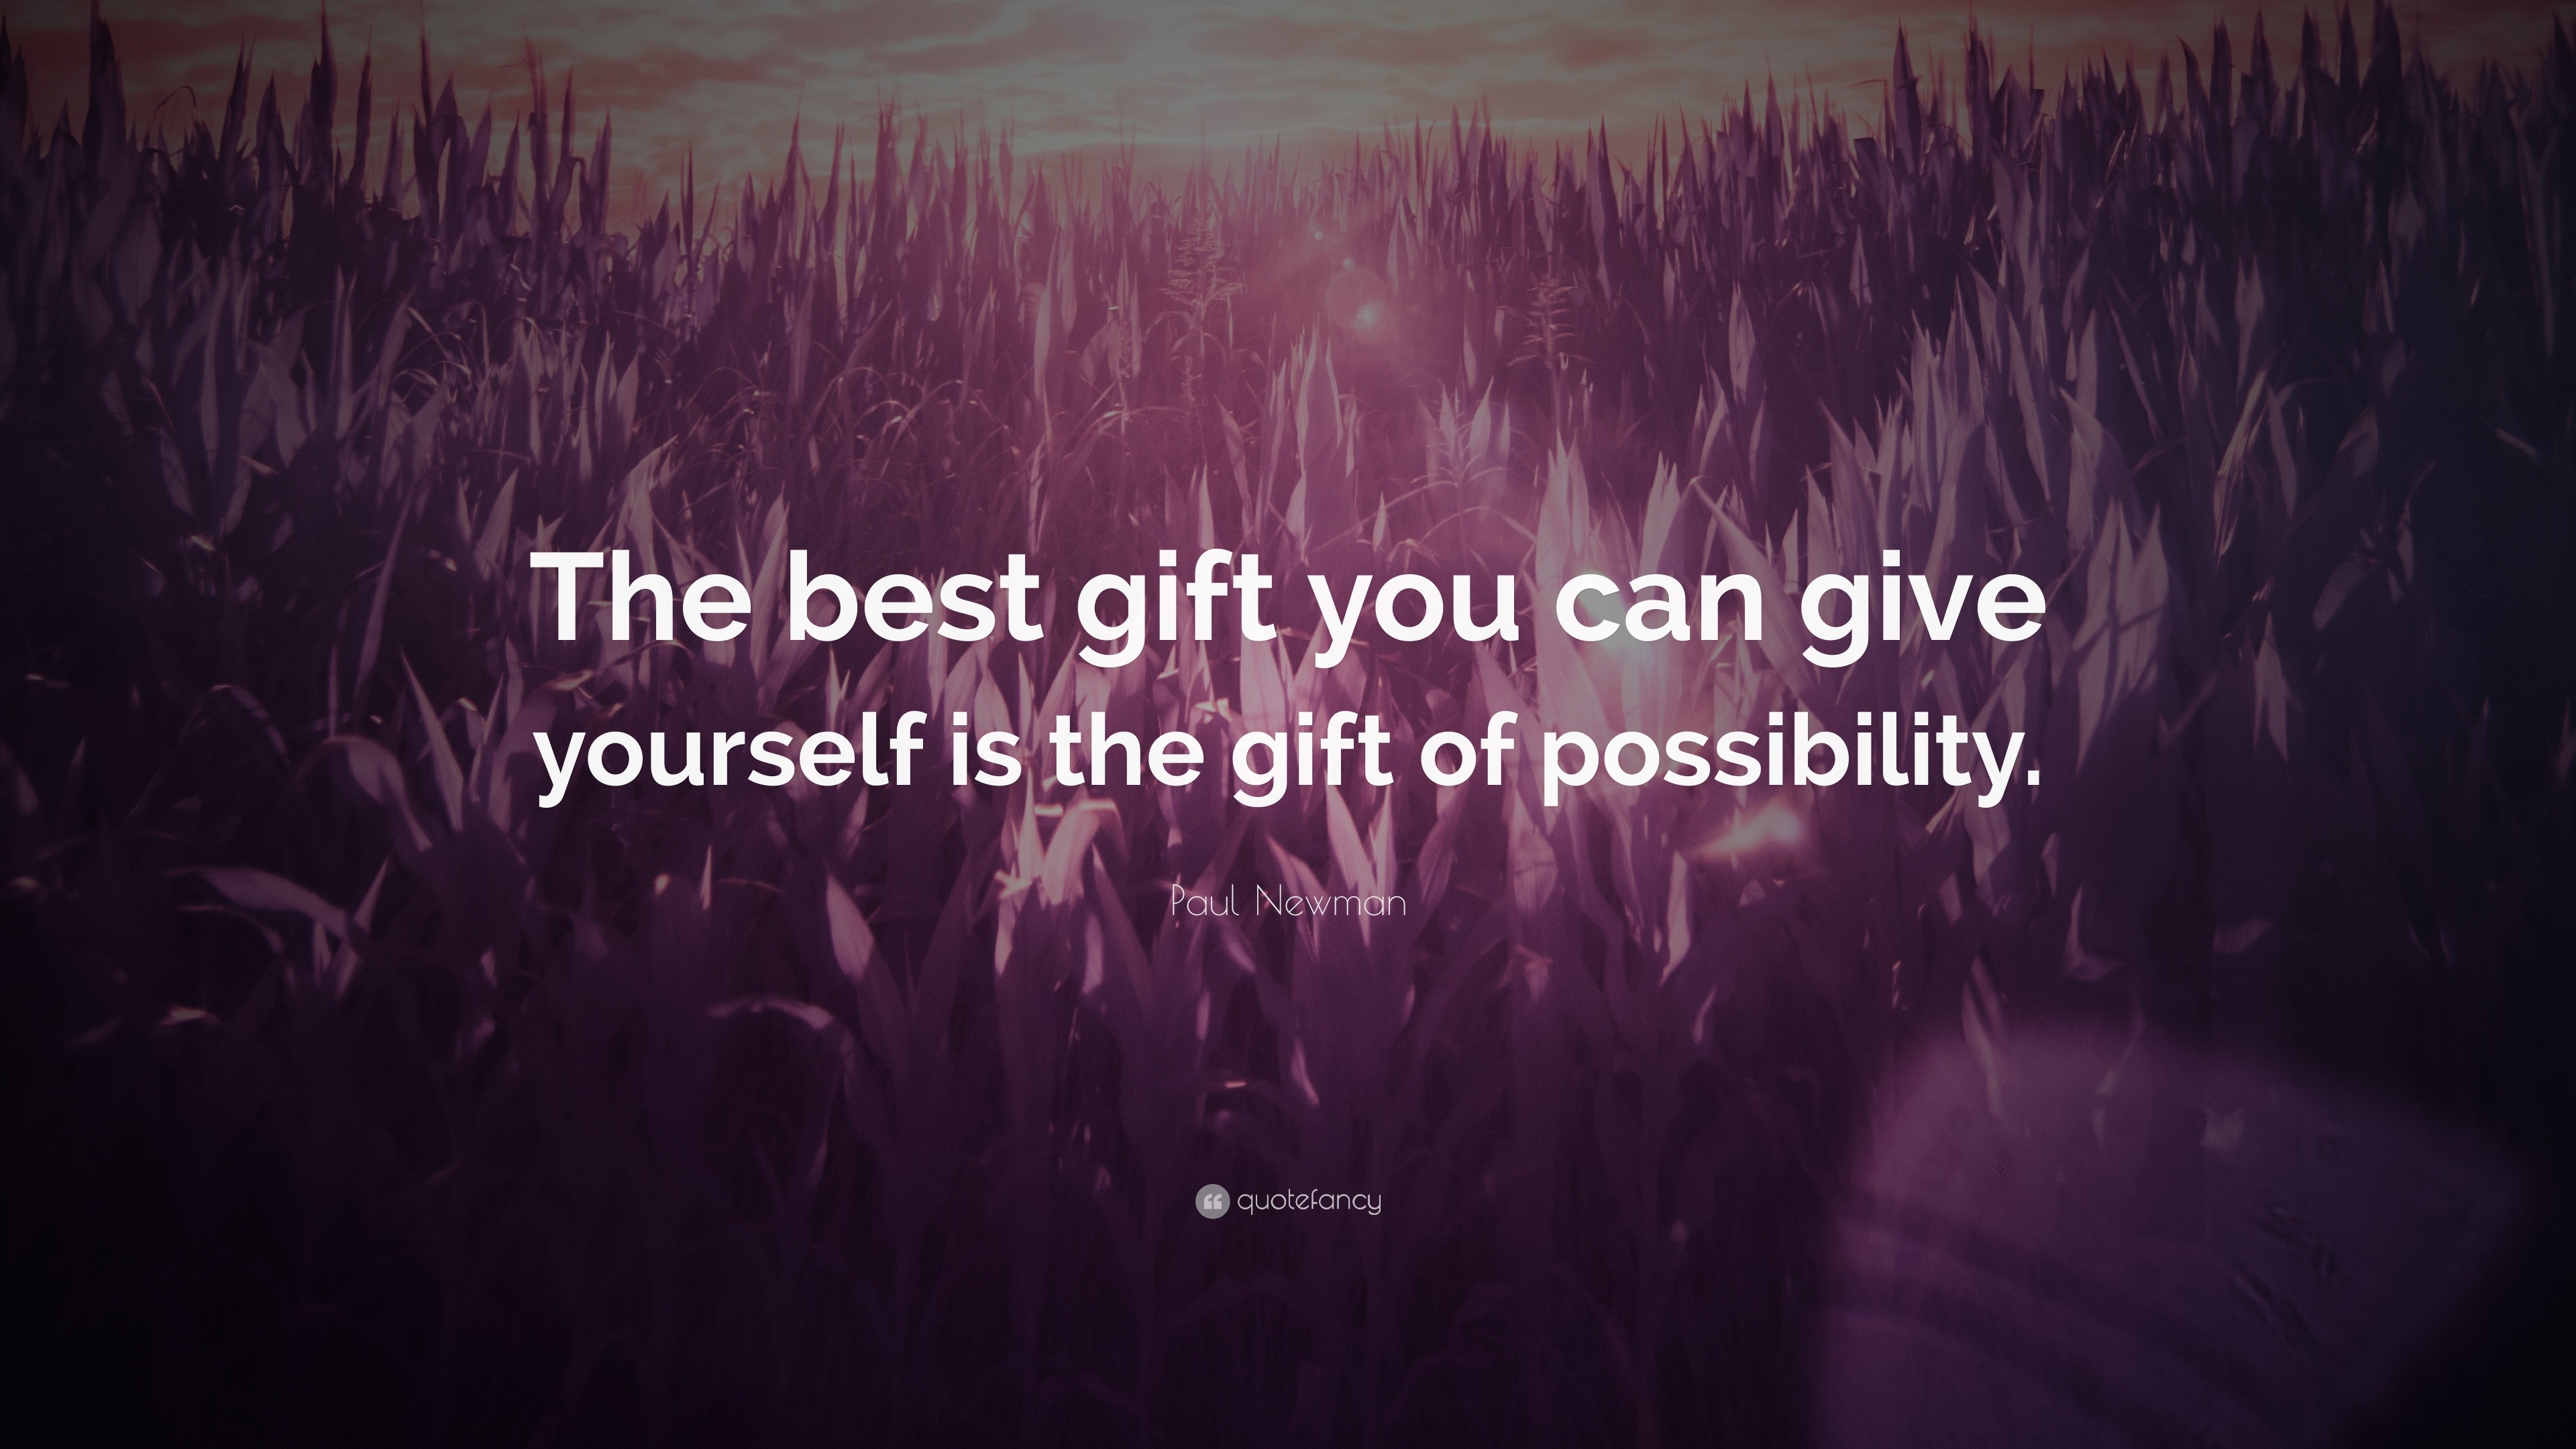 Paul Newman Quote The Best Gift You Can Give Yourself Is The Gift Of Possibility 7 Wallpapers Quotefancy